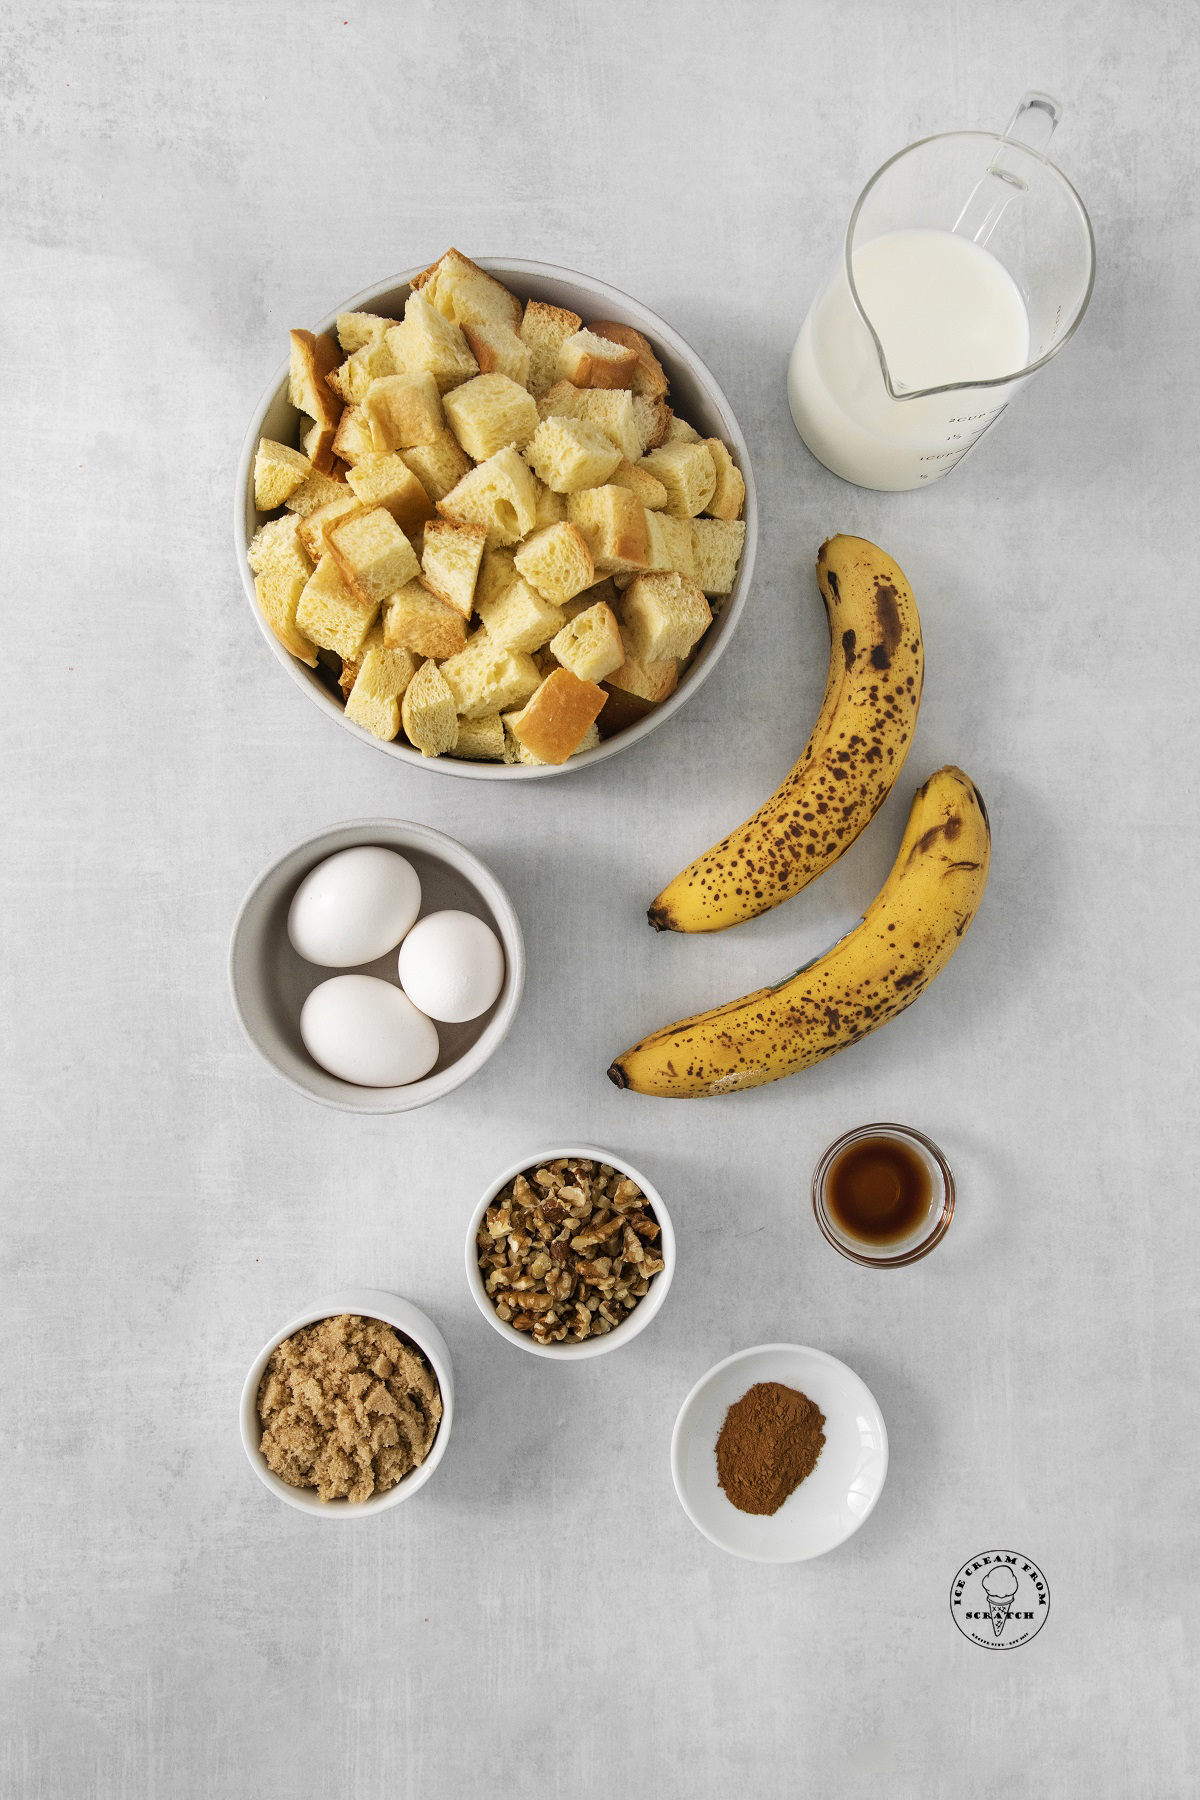 The ingredients in banana bread pudding including cubes of brioche, nuts, ripe bananas, eggs, and milk.